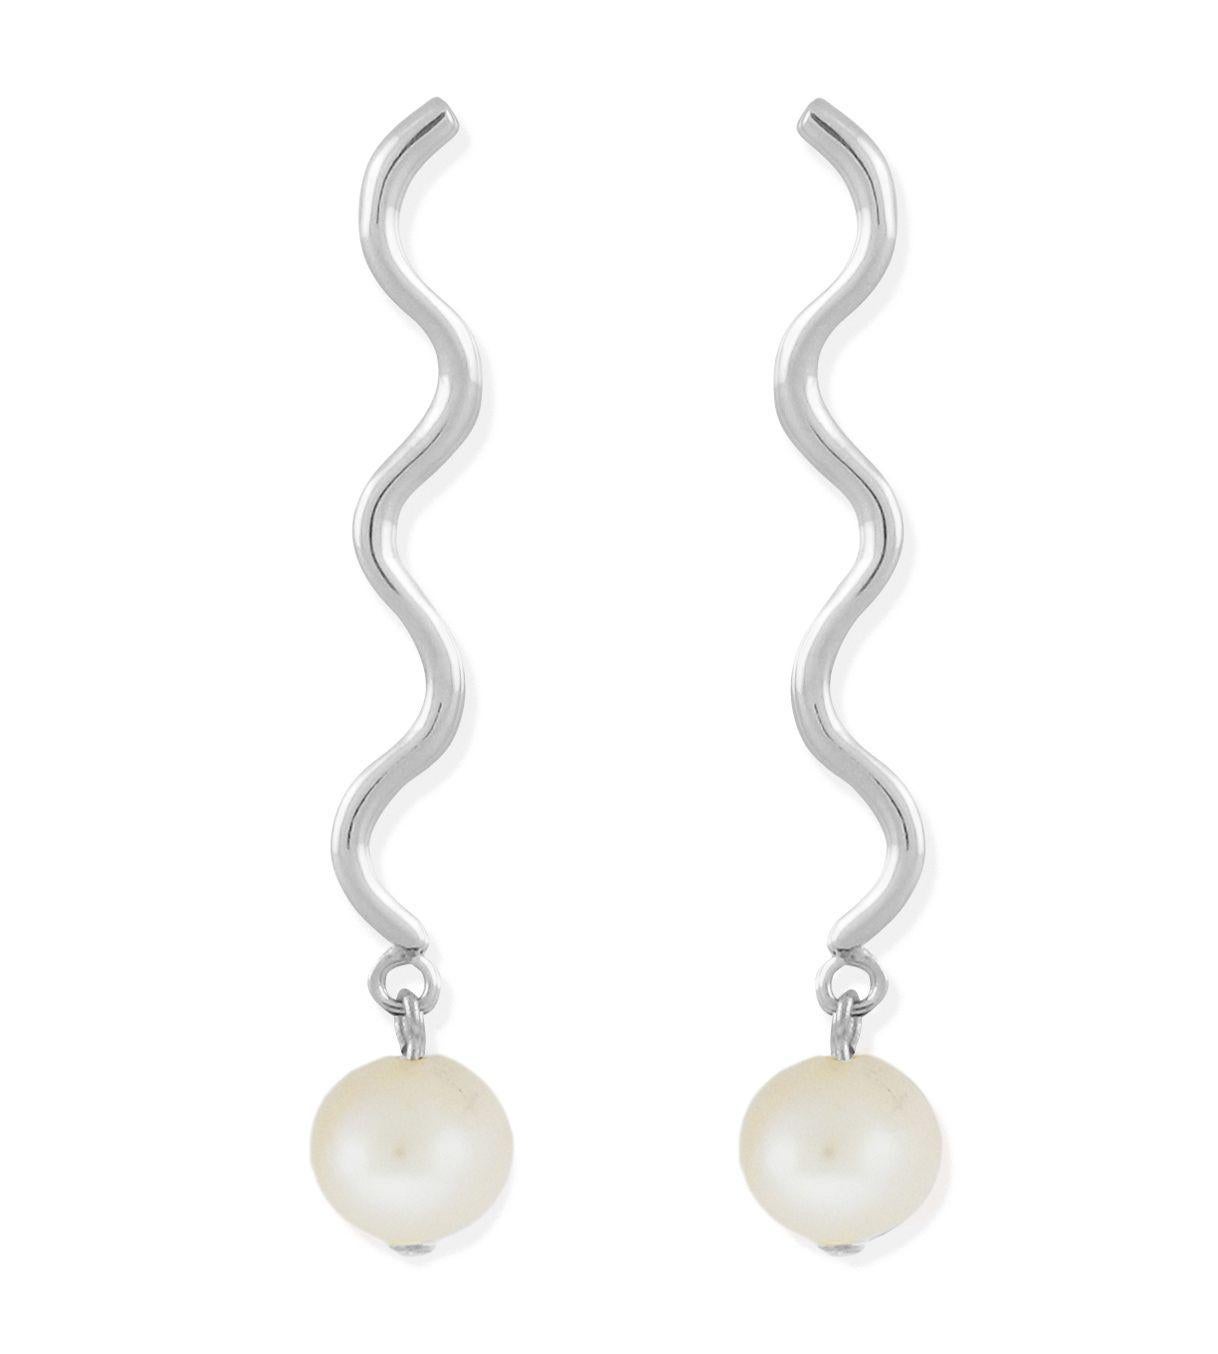 Inspired by the works of Verner Panton, these earrings are a playful exploration of line and form featuring a delicate wavy pattern and freshwater pearls. Each pair is cast from recycled sterling silver and handmade in New York City.

ABOUT THE